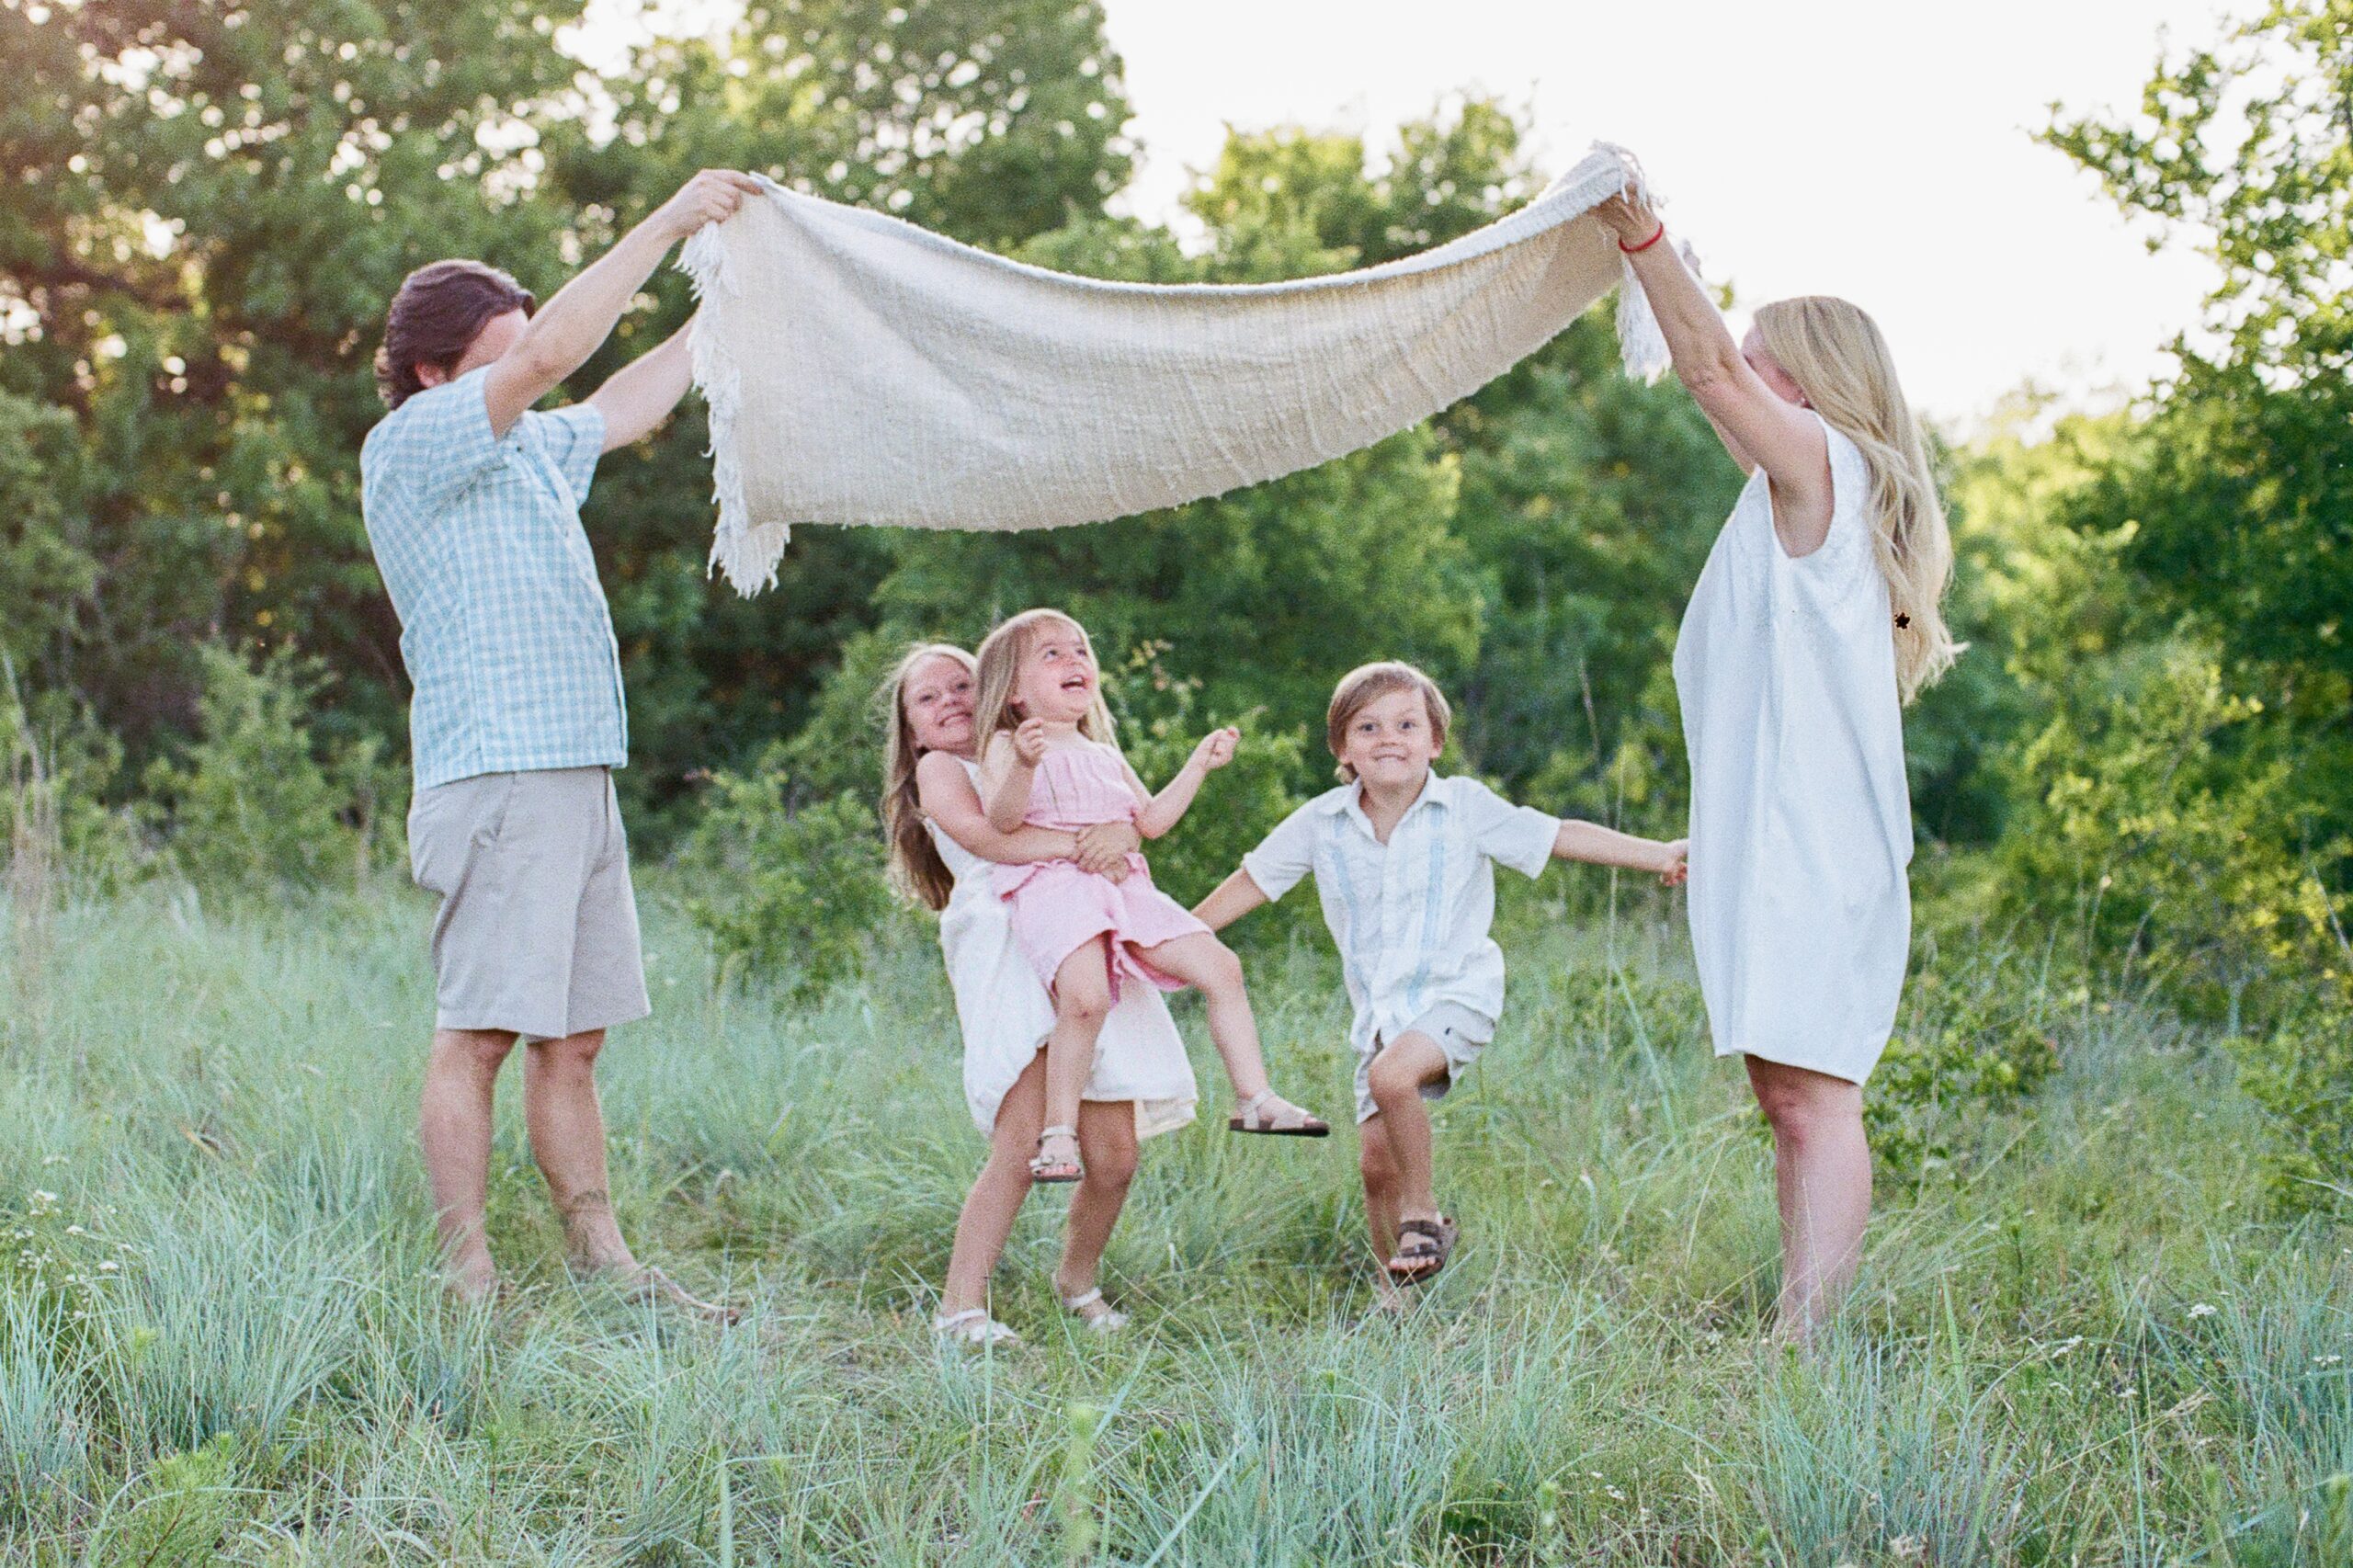 Shows Examples of What to Wear for Family Photos